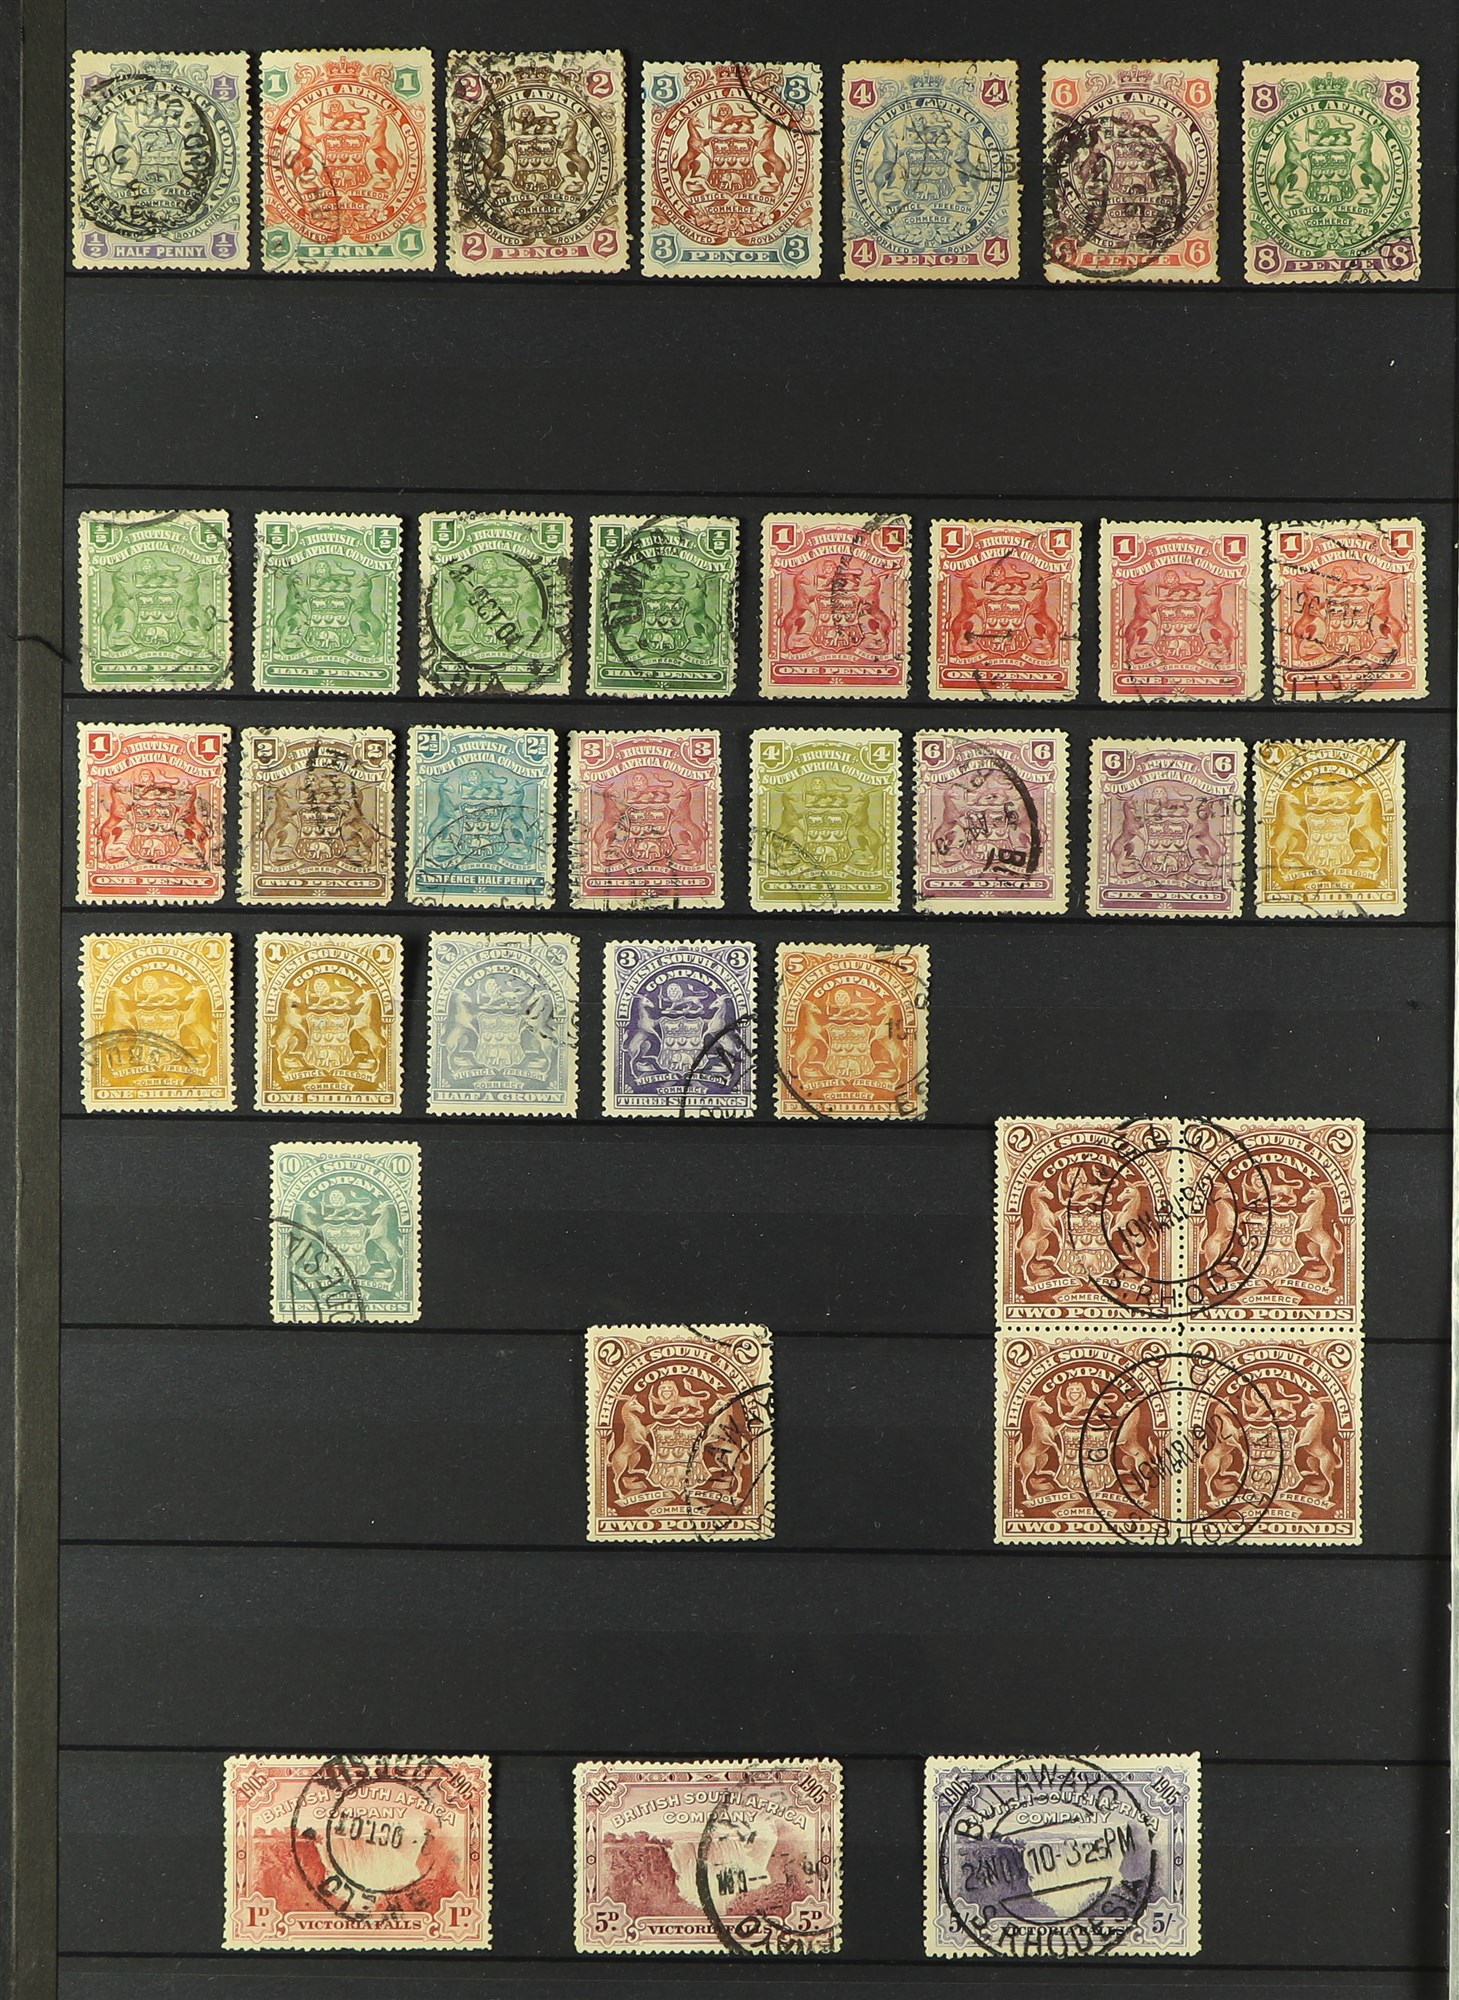 RHODESIA 1892 - 1917 USED COLLECTION of 150+ stamps on protective pages, many sets, highers - Image 2 of 3